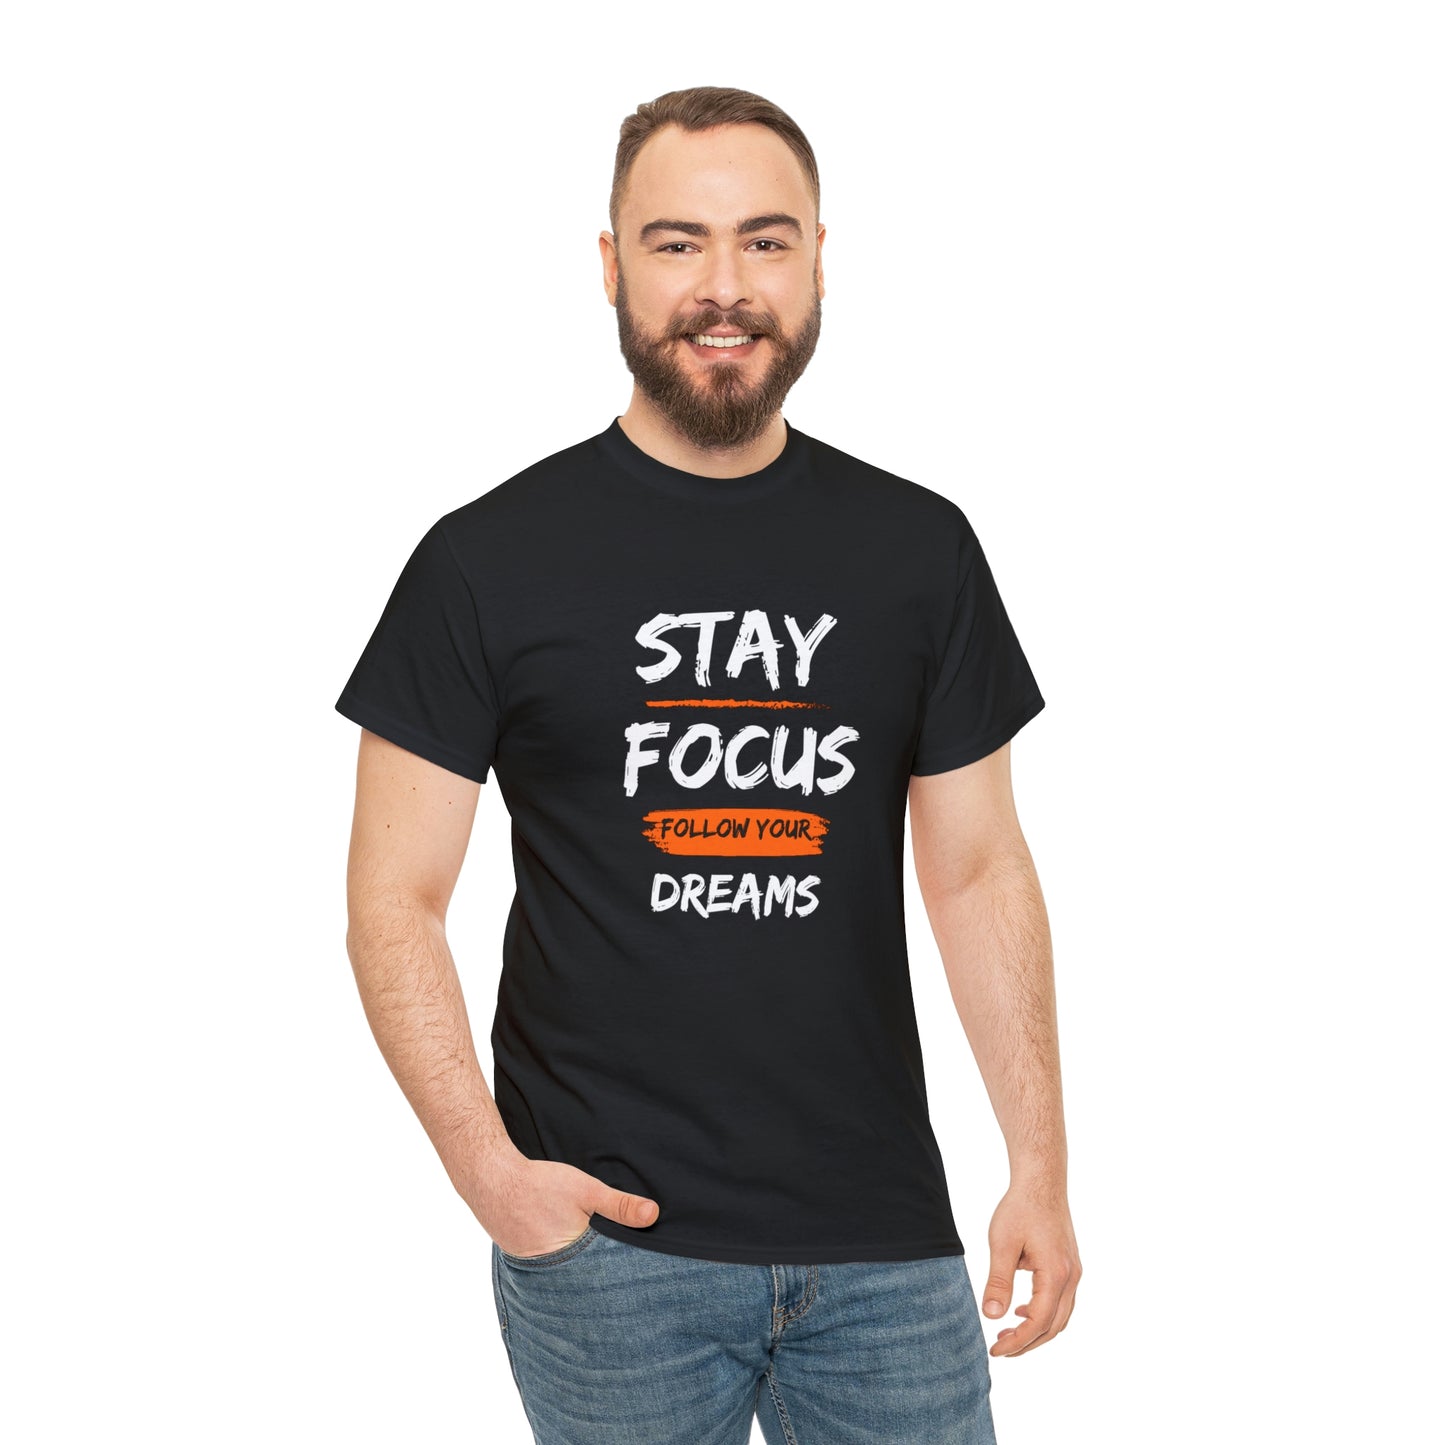 STAY FOCUS FOLLOW YOUR DREAMS T-SHIRT